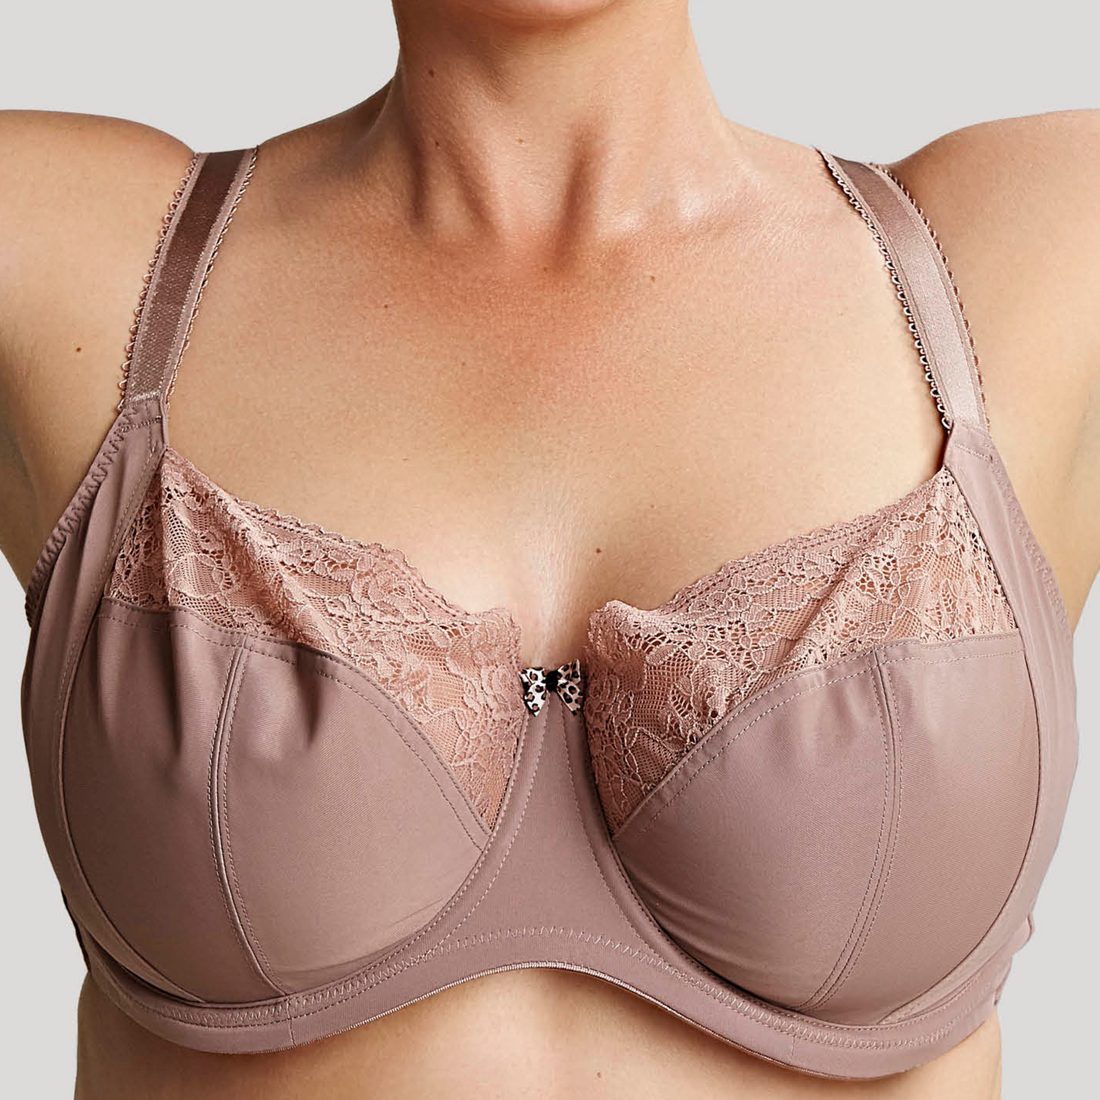 BraTopia - We're doing a survey, tell us how many bras you own below. Let's  get to know each other a little better. ❤️ #bras #calgary #brassiere  #lingerie #girlstalk #panties #beauty